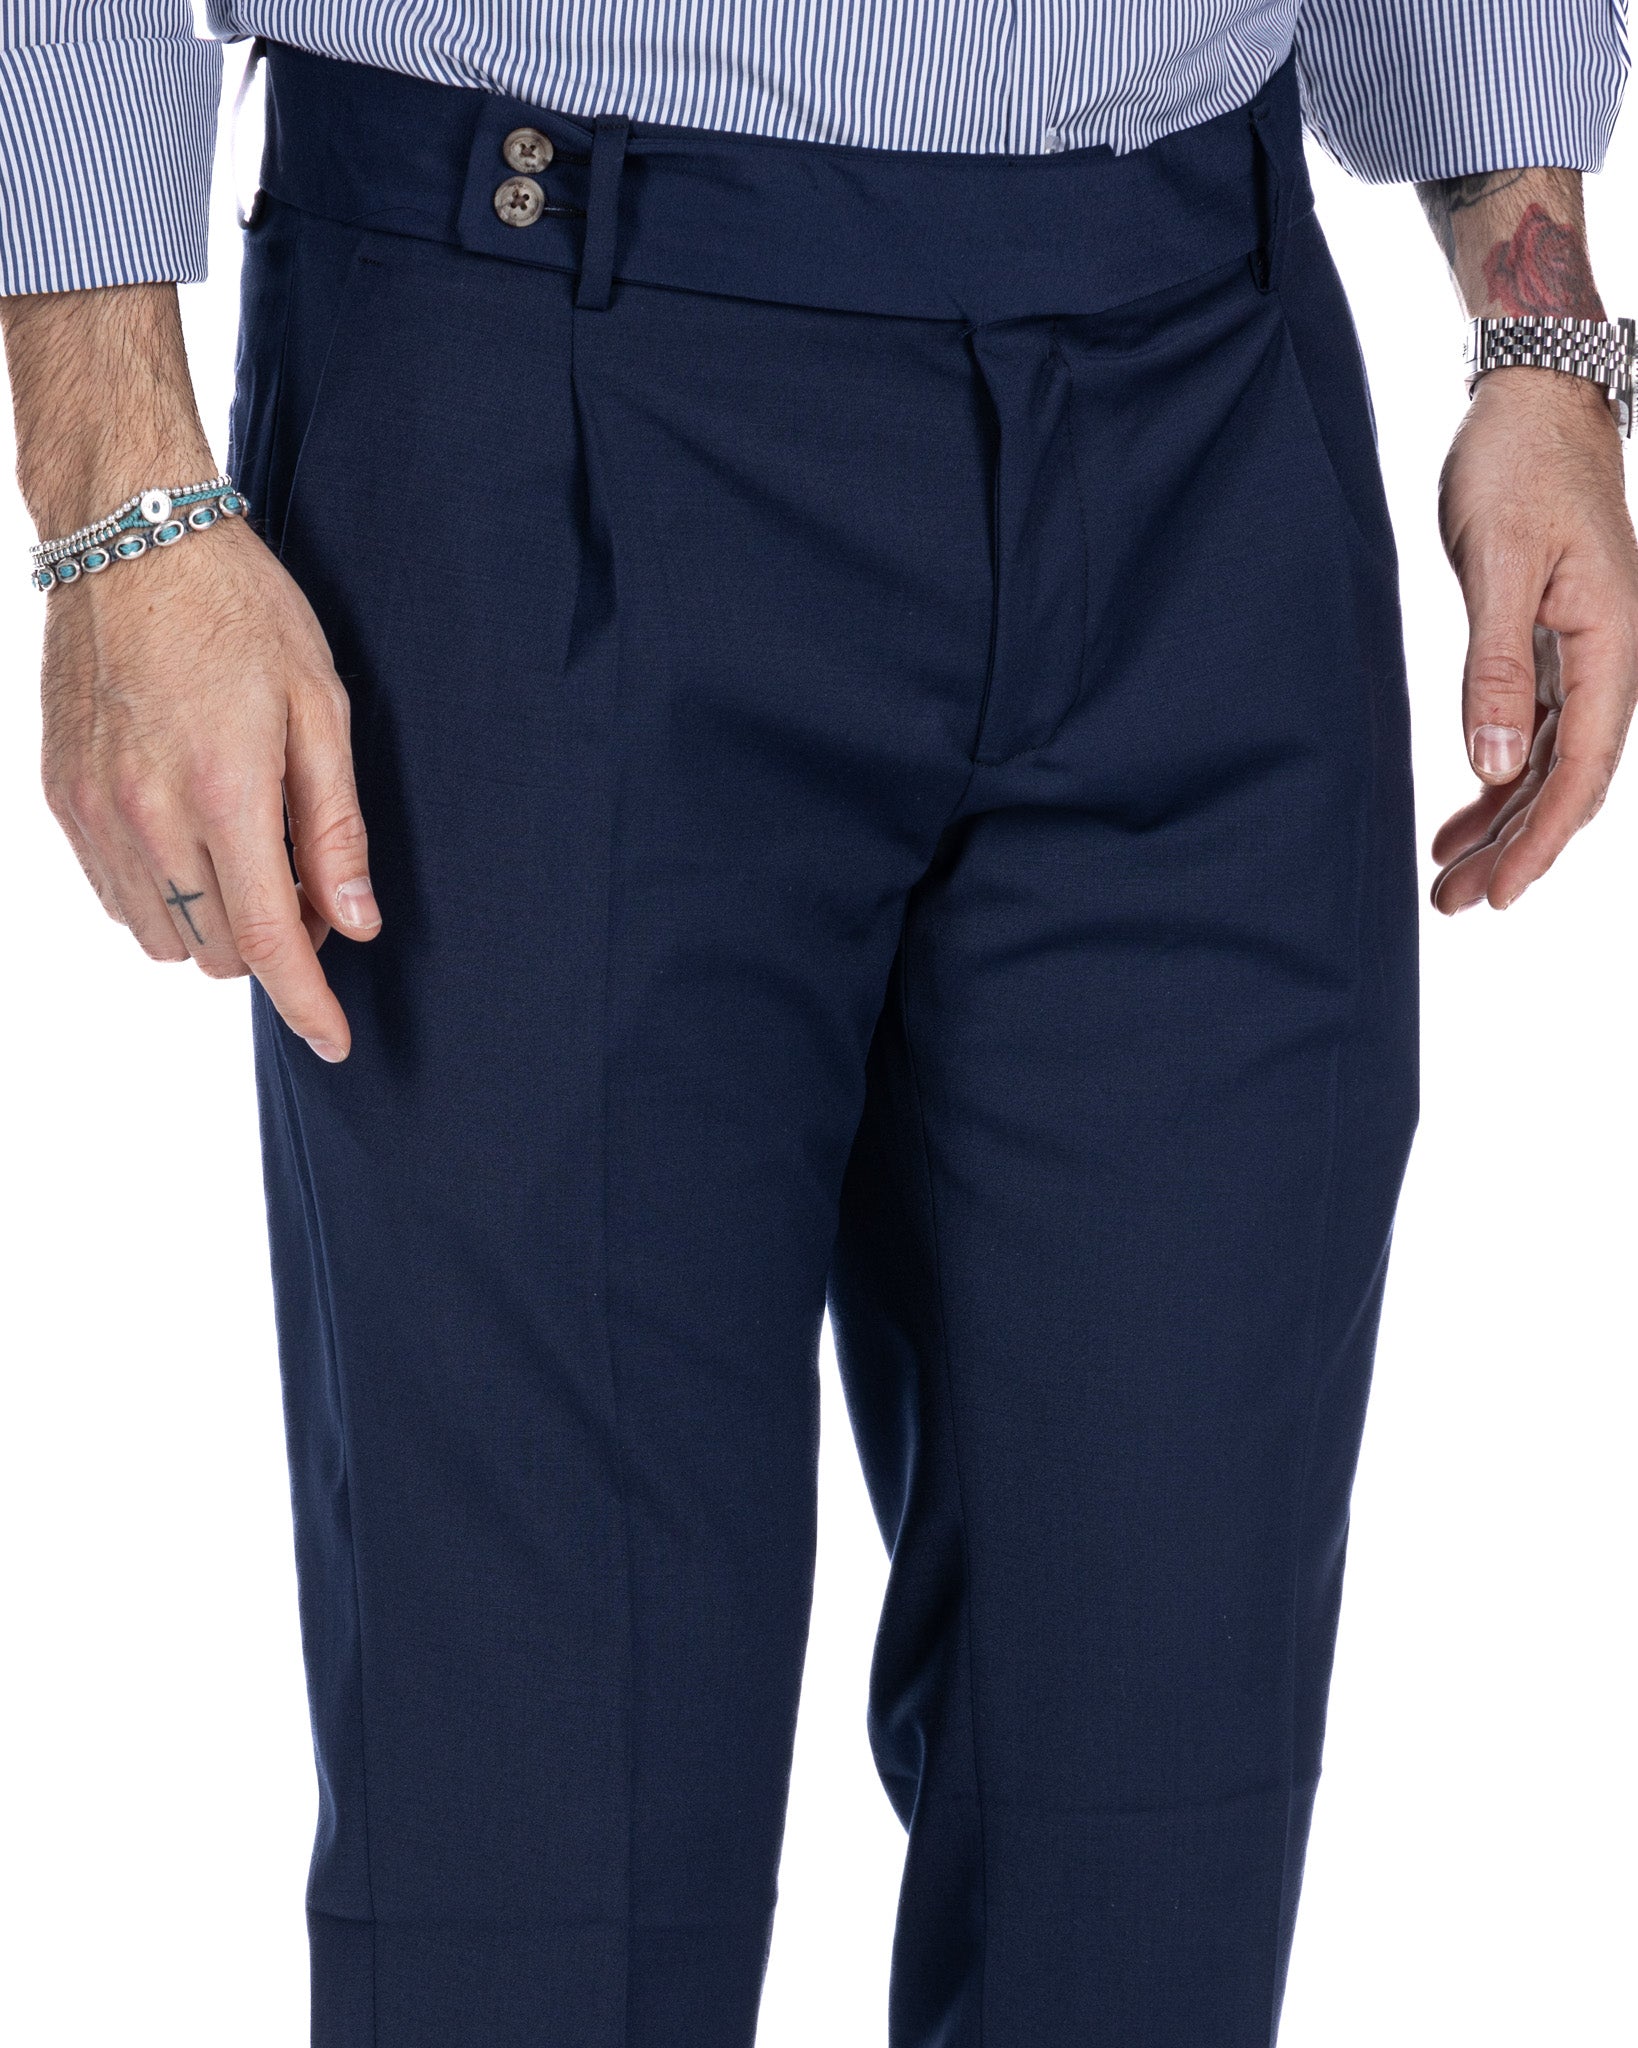 Italian - blue high-waisted trousers in wool blend